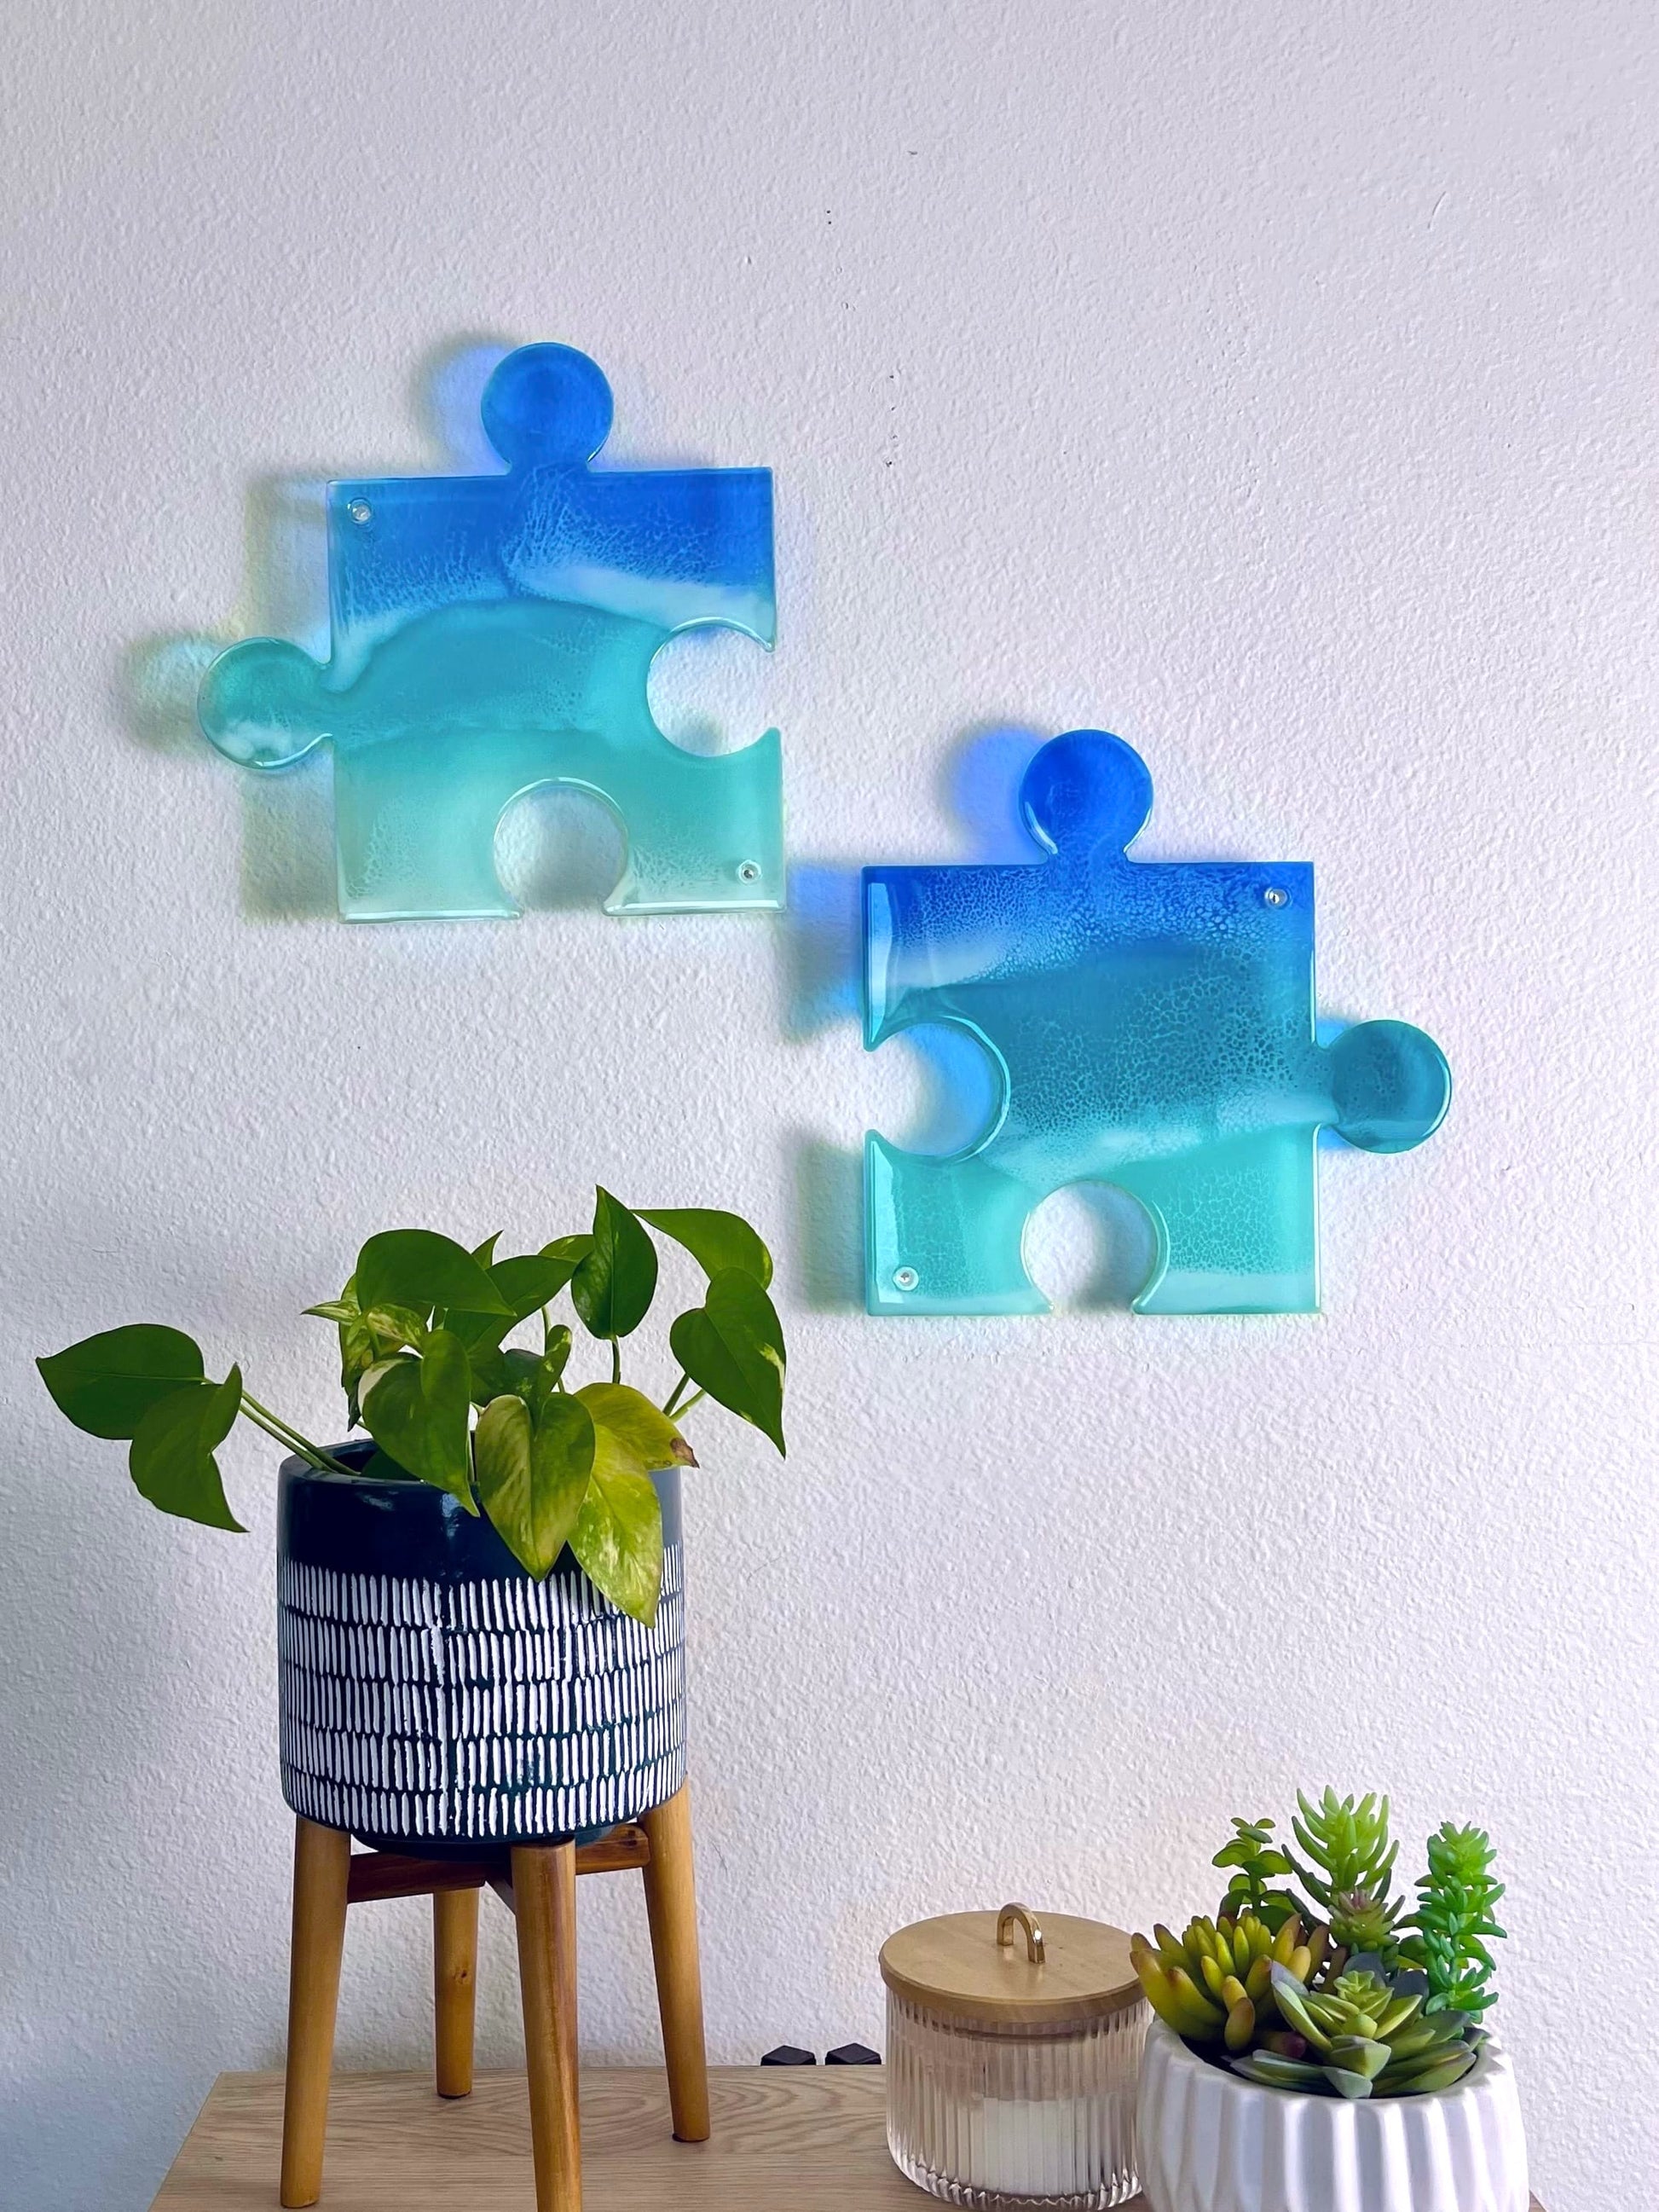 Two see-through, blue pieces of ocean artwork in the shape of puzzle pieces casting colorful shadow on wall.